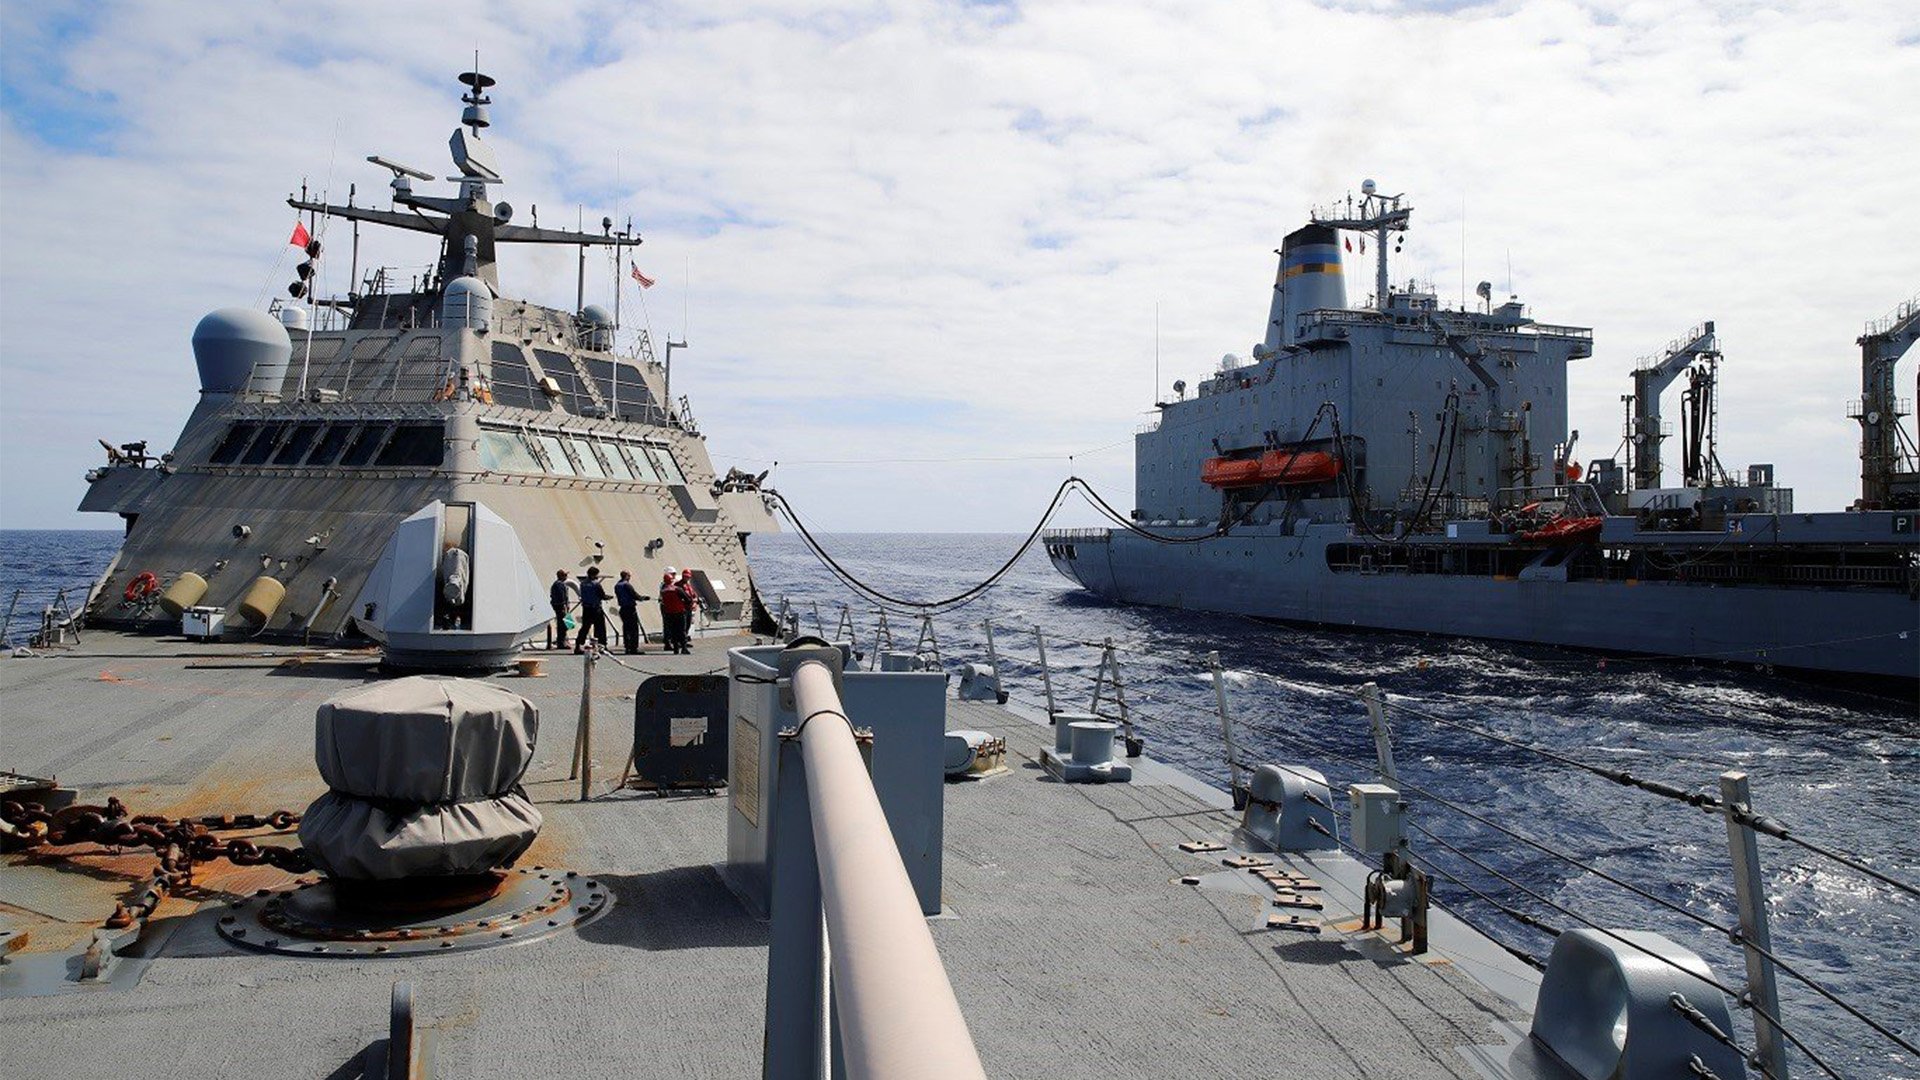 Sailors conduct a replenishment at sea on board the littoral combat ship Sioux City (LCS 11) in the Atlantic Ocean on Sept. 26, 2022. Sioux City was supposed to redeploy to Florida from US Naval Forces Europe's area of operation, but Hurricane Ian had other ideas. US Navy photo by Mass Communication Specialist 3rd Class Nicholas A. Russell.